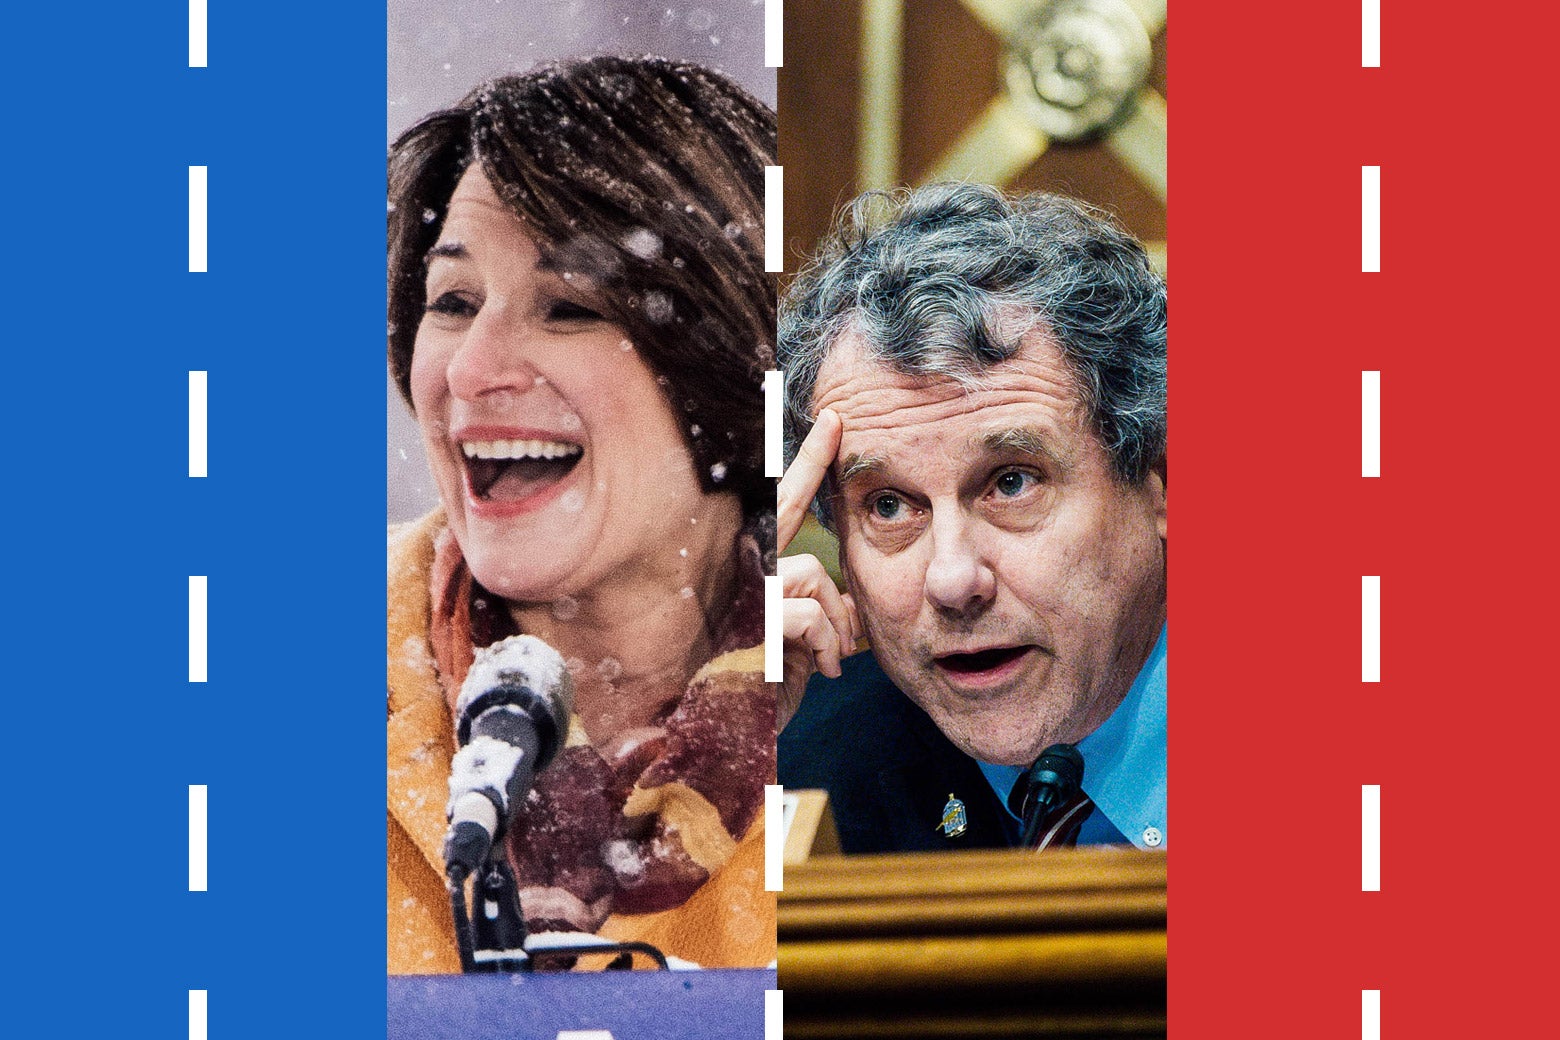 Amy Klobuchar and Sherrod Brown, flanked by a blue lane of traffic on the left and a red lane of traffic on the right.